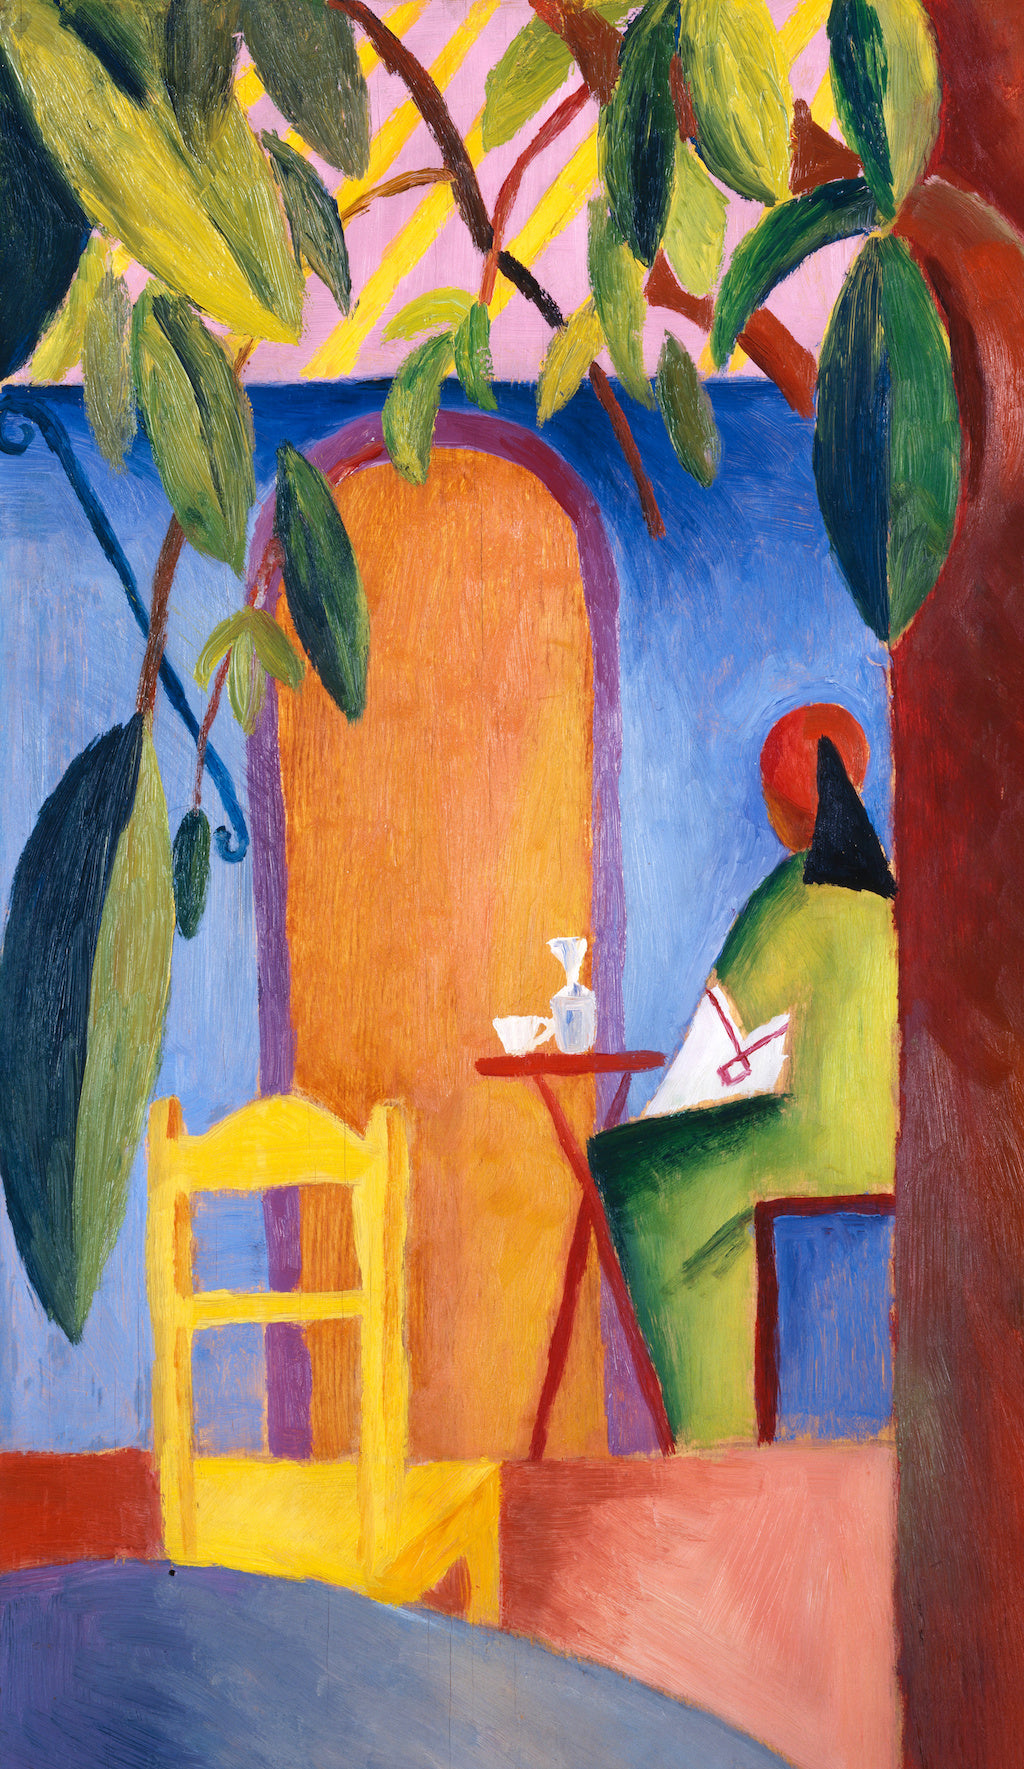 Artifact Puzzles - August Macke Turkish Cafe Wooden Jigsaw Puzzle